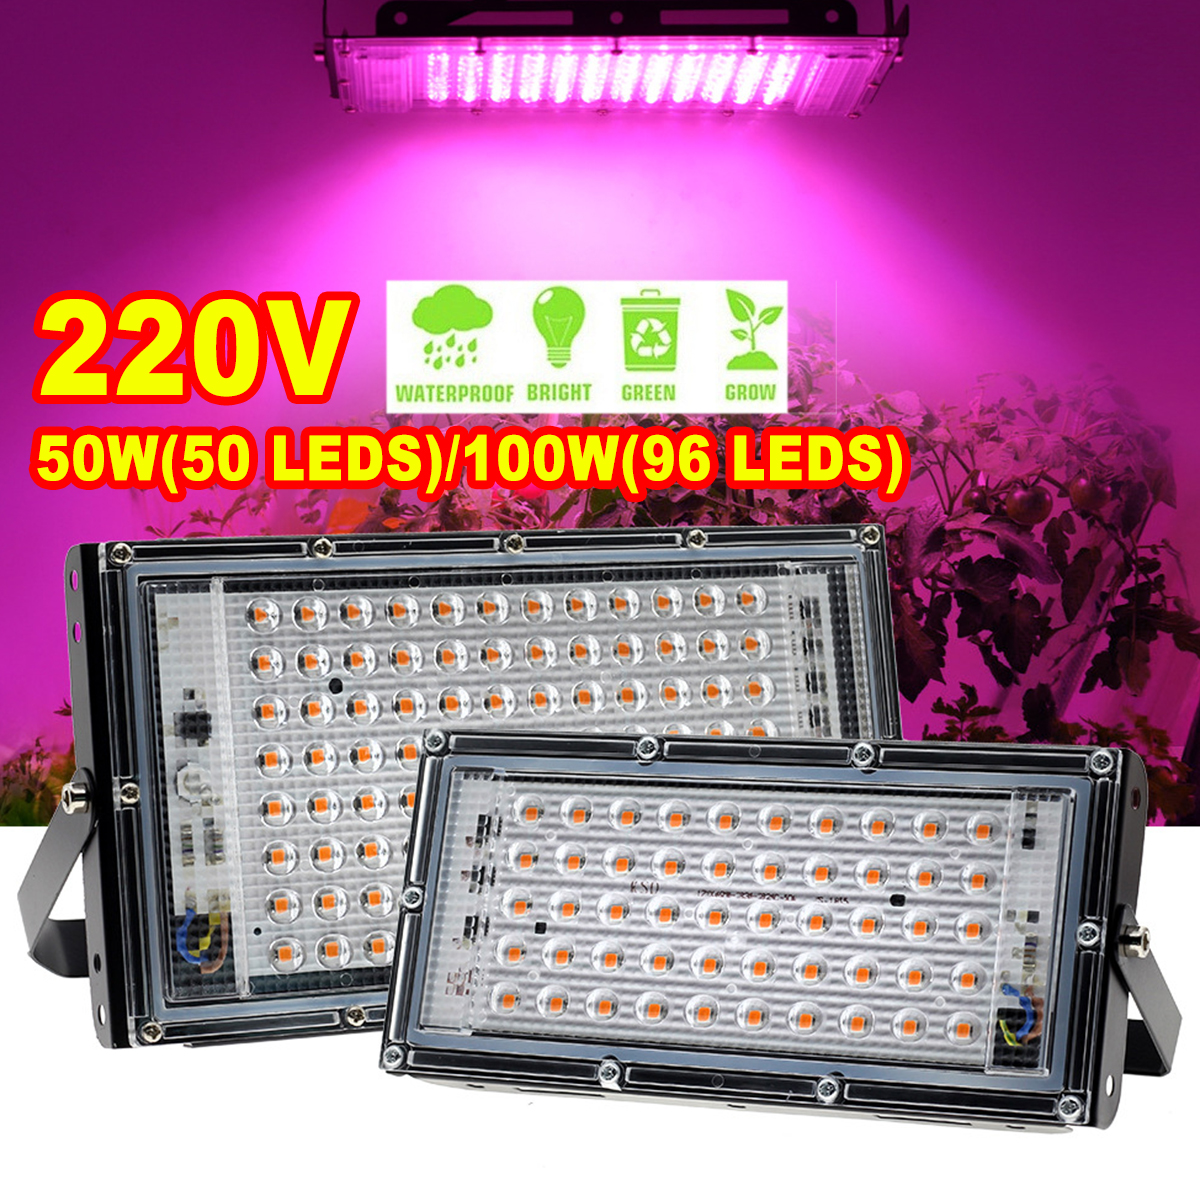 50100W-5096LED-220V-Full-Spectrum-Grow-Light-Plant-Growing-Lamp-Lights-With-Clip-For-Indoor-Plants-1800271-1